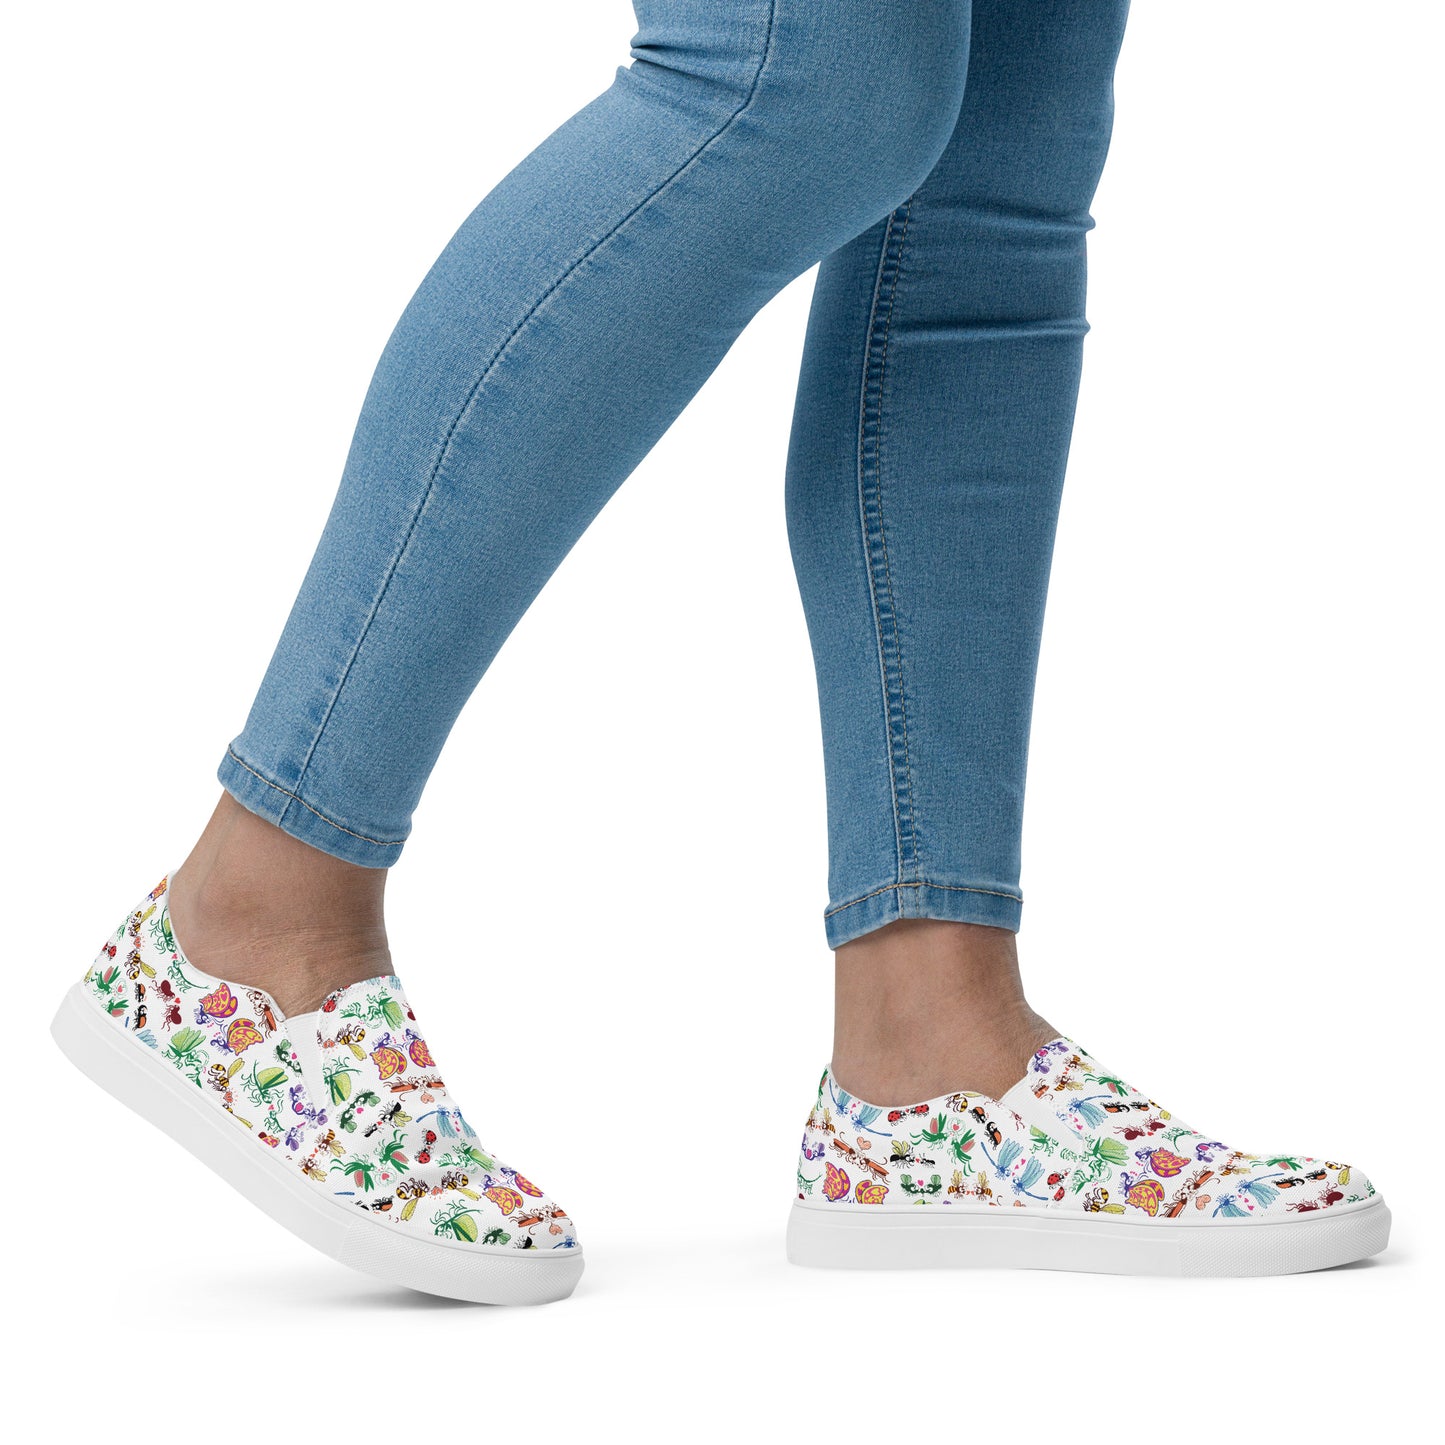 Cool insects madly in love Women’s slip-on canvas shoes. Lifestyle